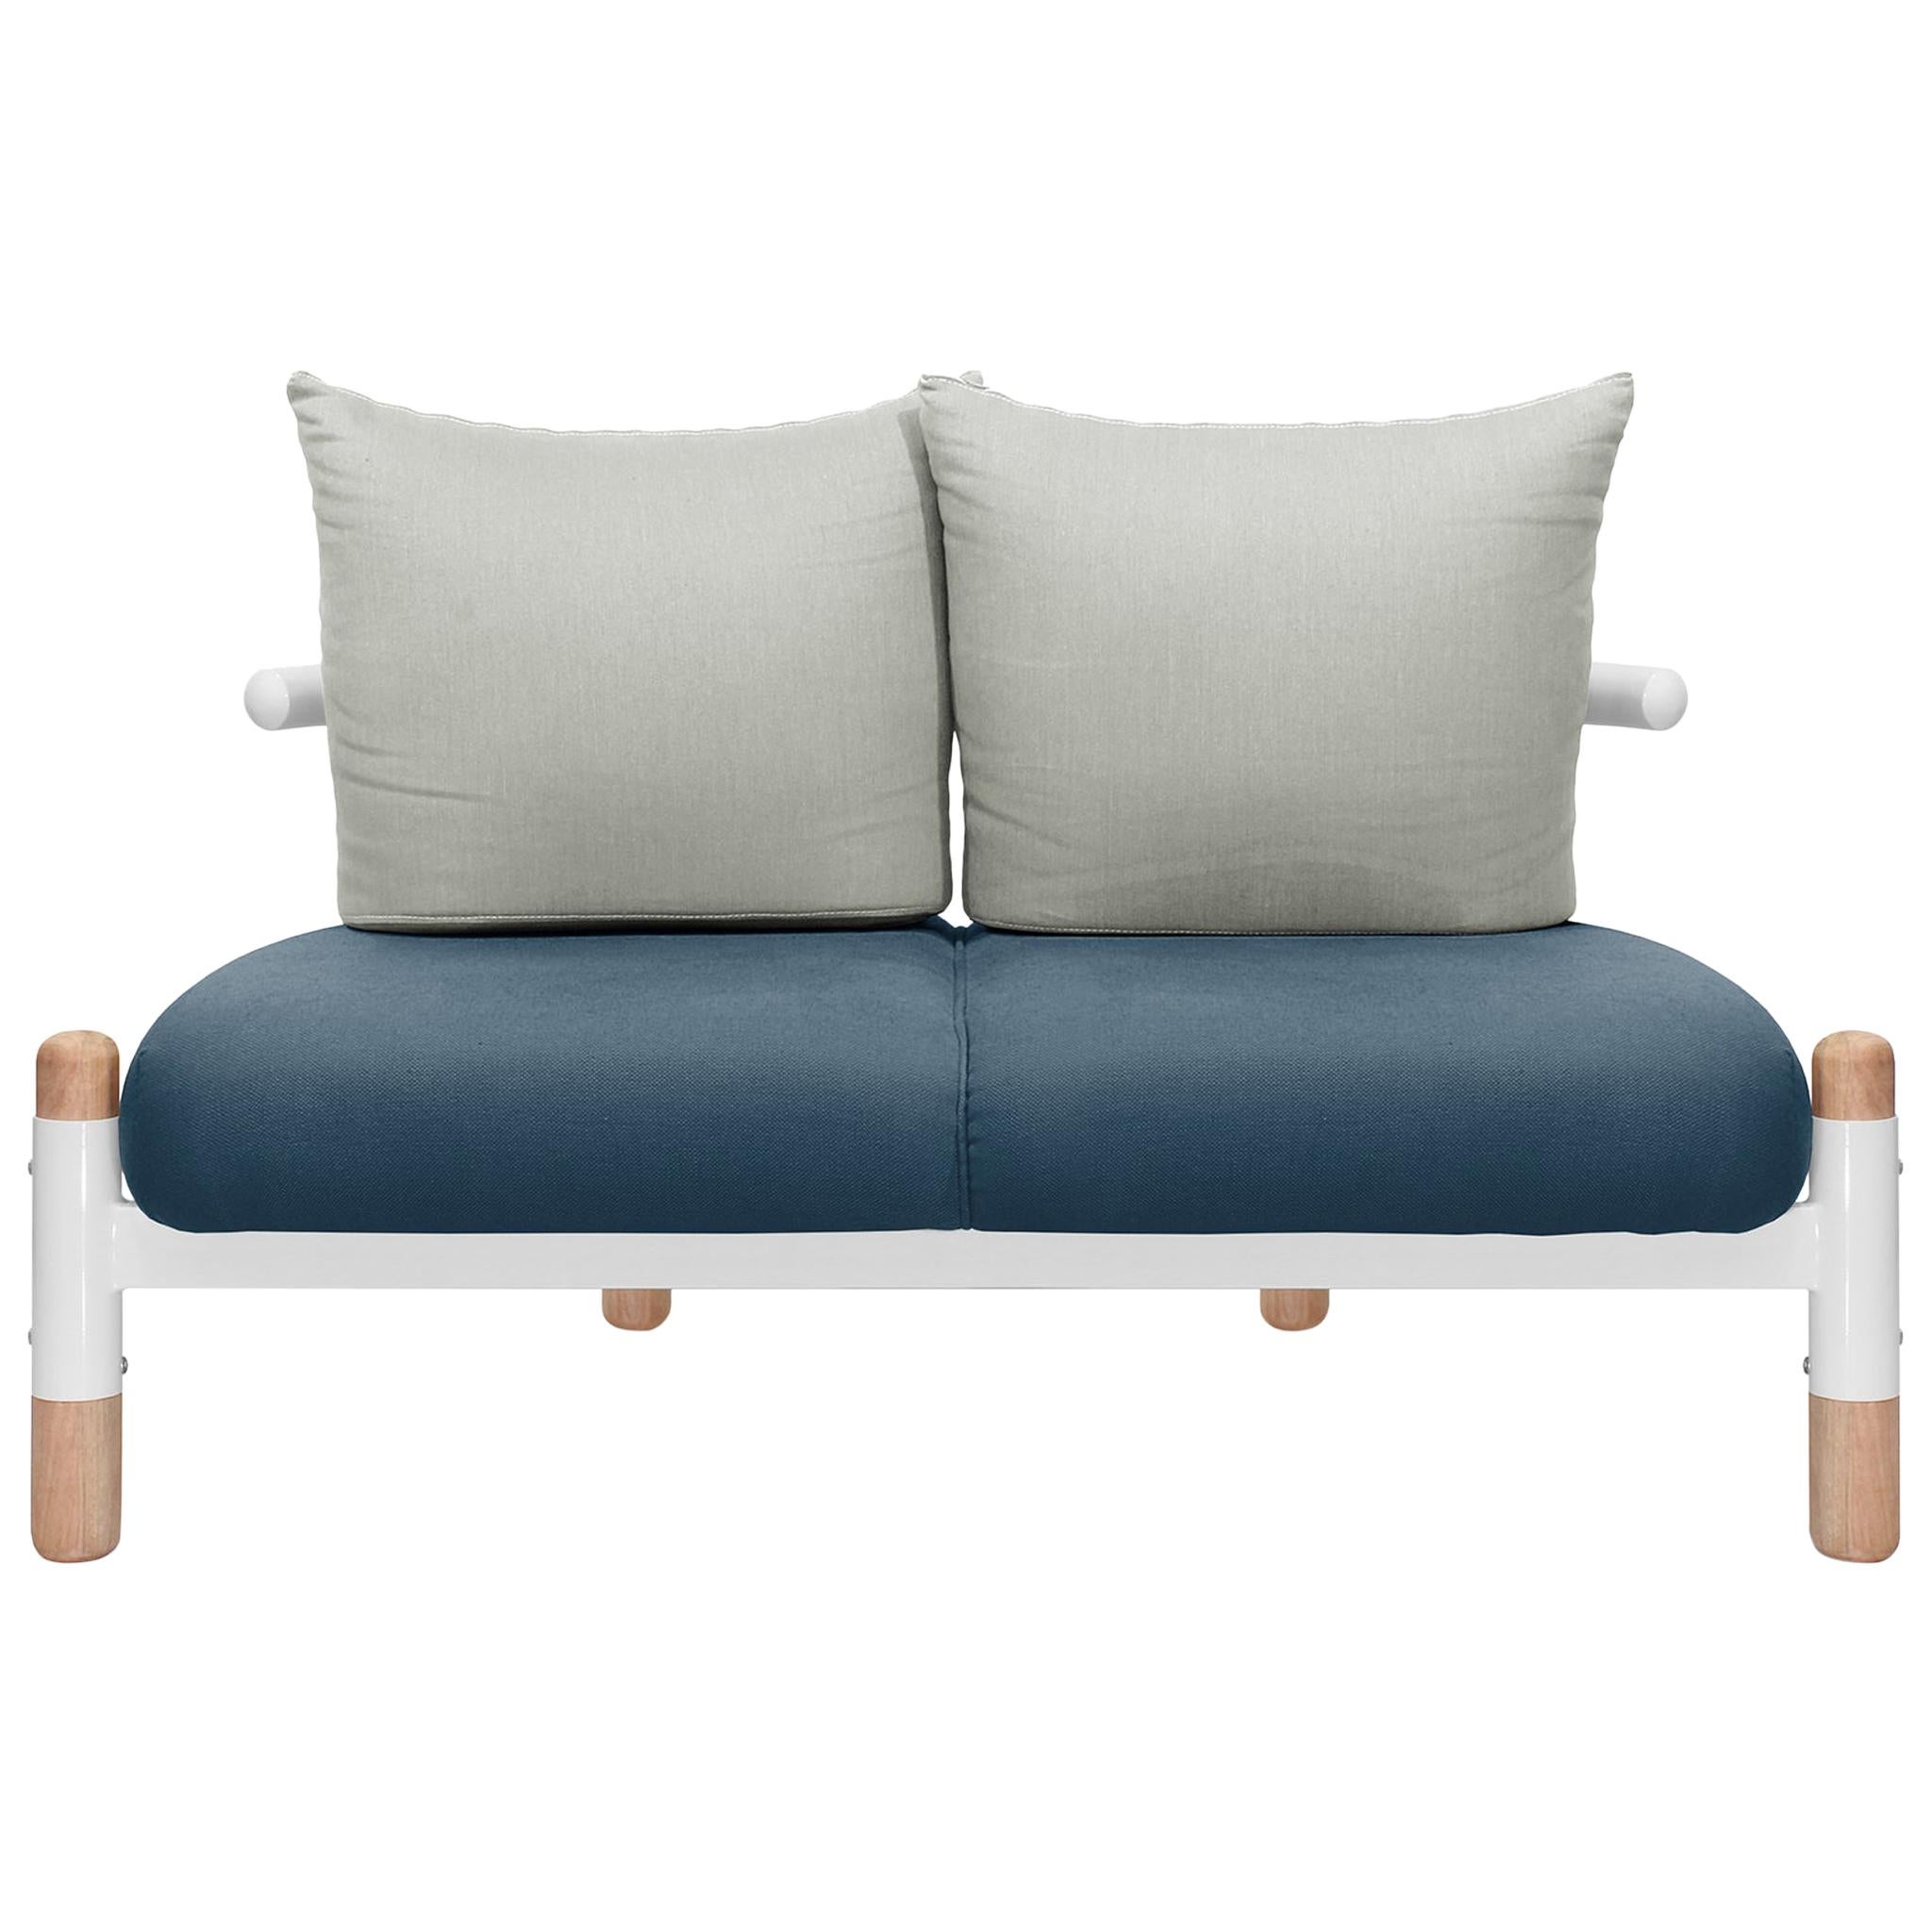 Blue PK15 Two-Seat Sofa, Carbon Steel Structure & Wood Legs by Paulo Kobylka For Sale